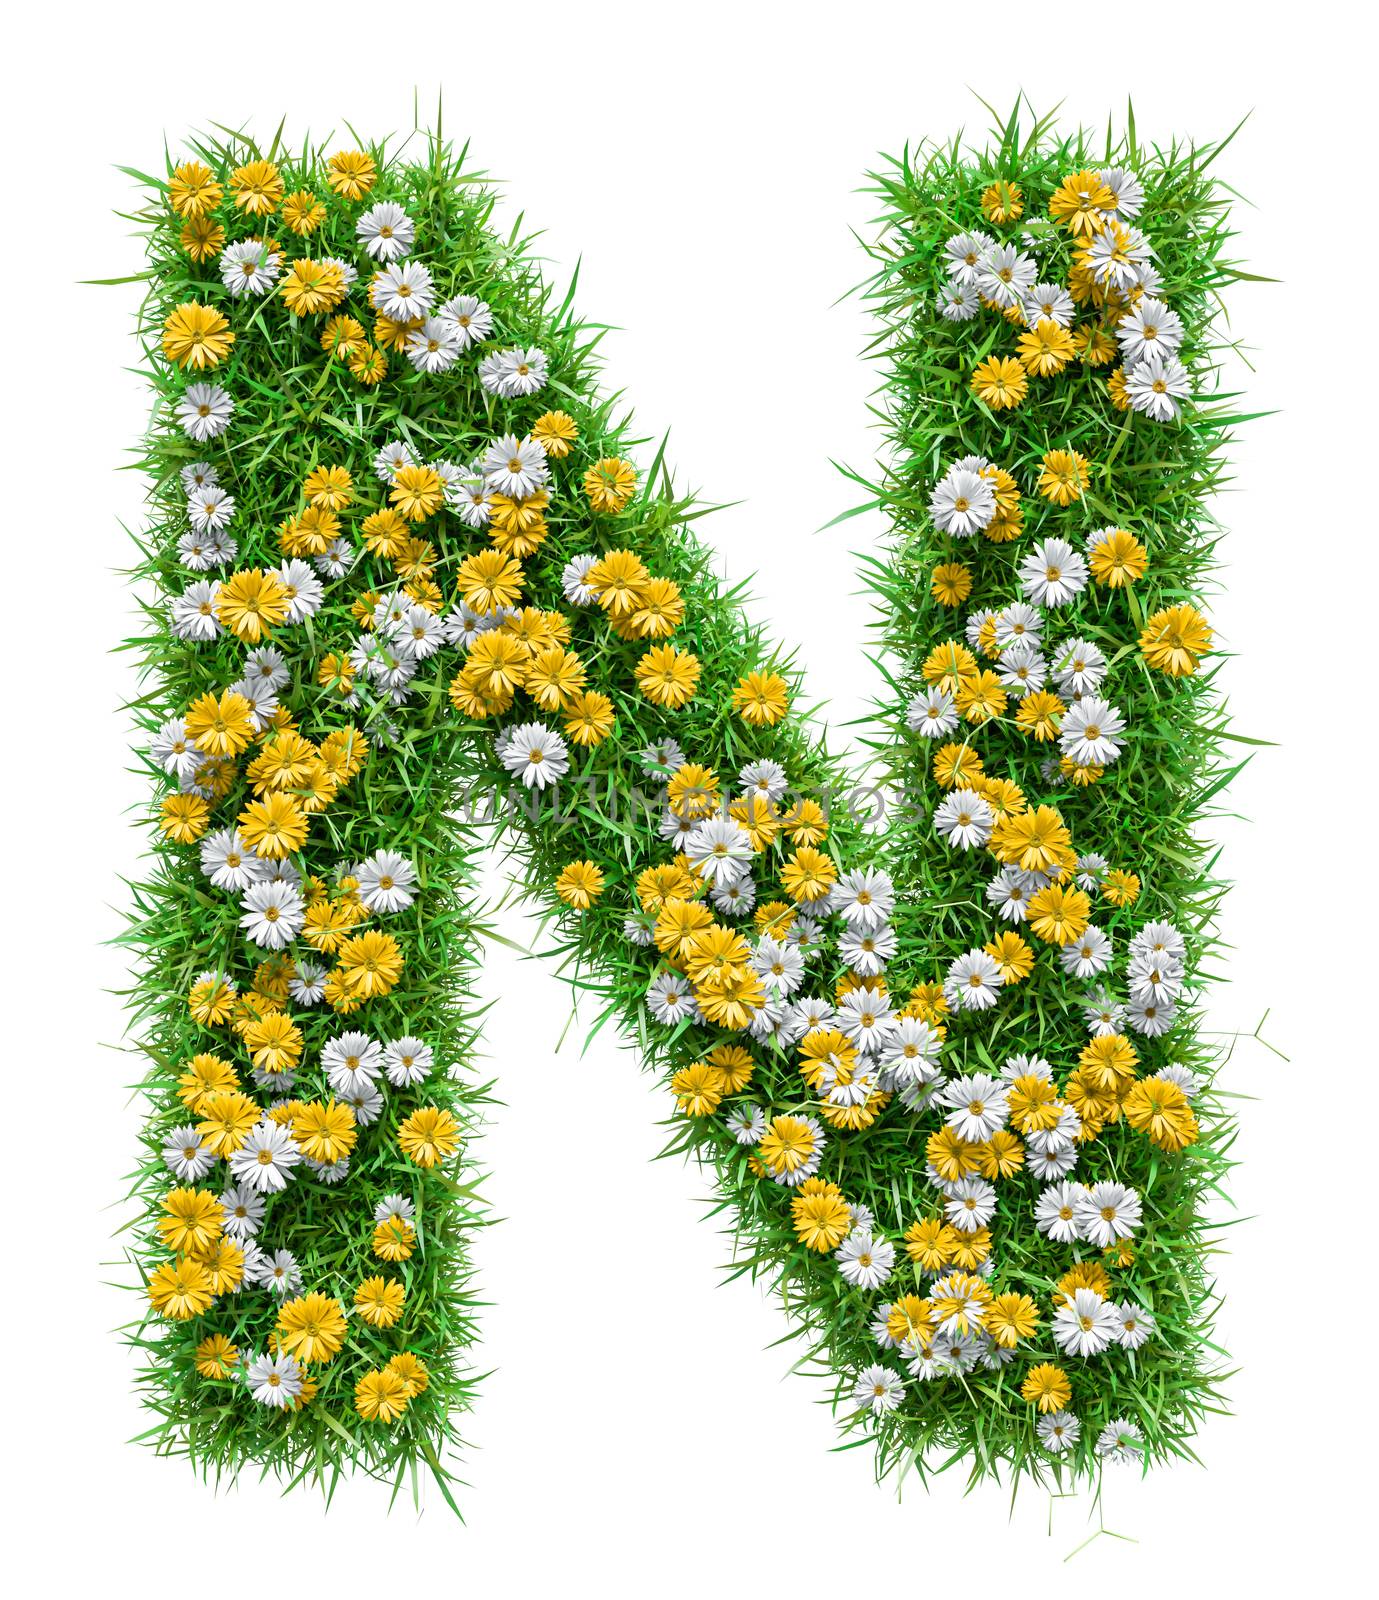 Letter N Of Green Grass And Flowers. Isolated On White Background. Font For Your Design. 3D Illustration